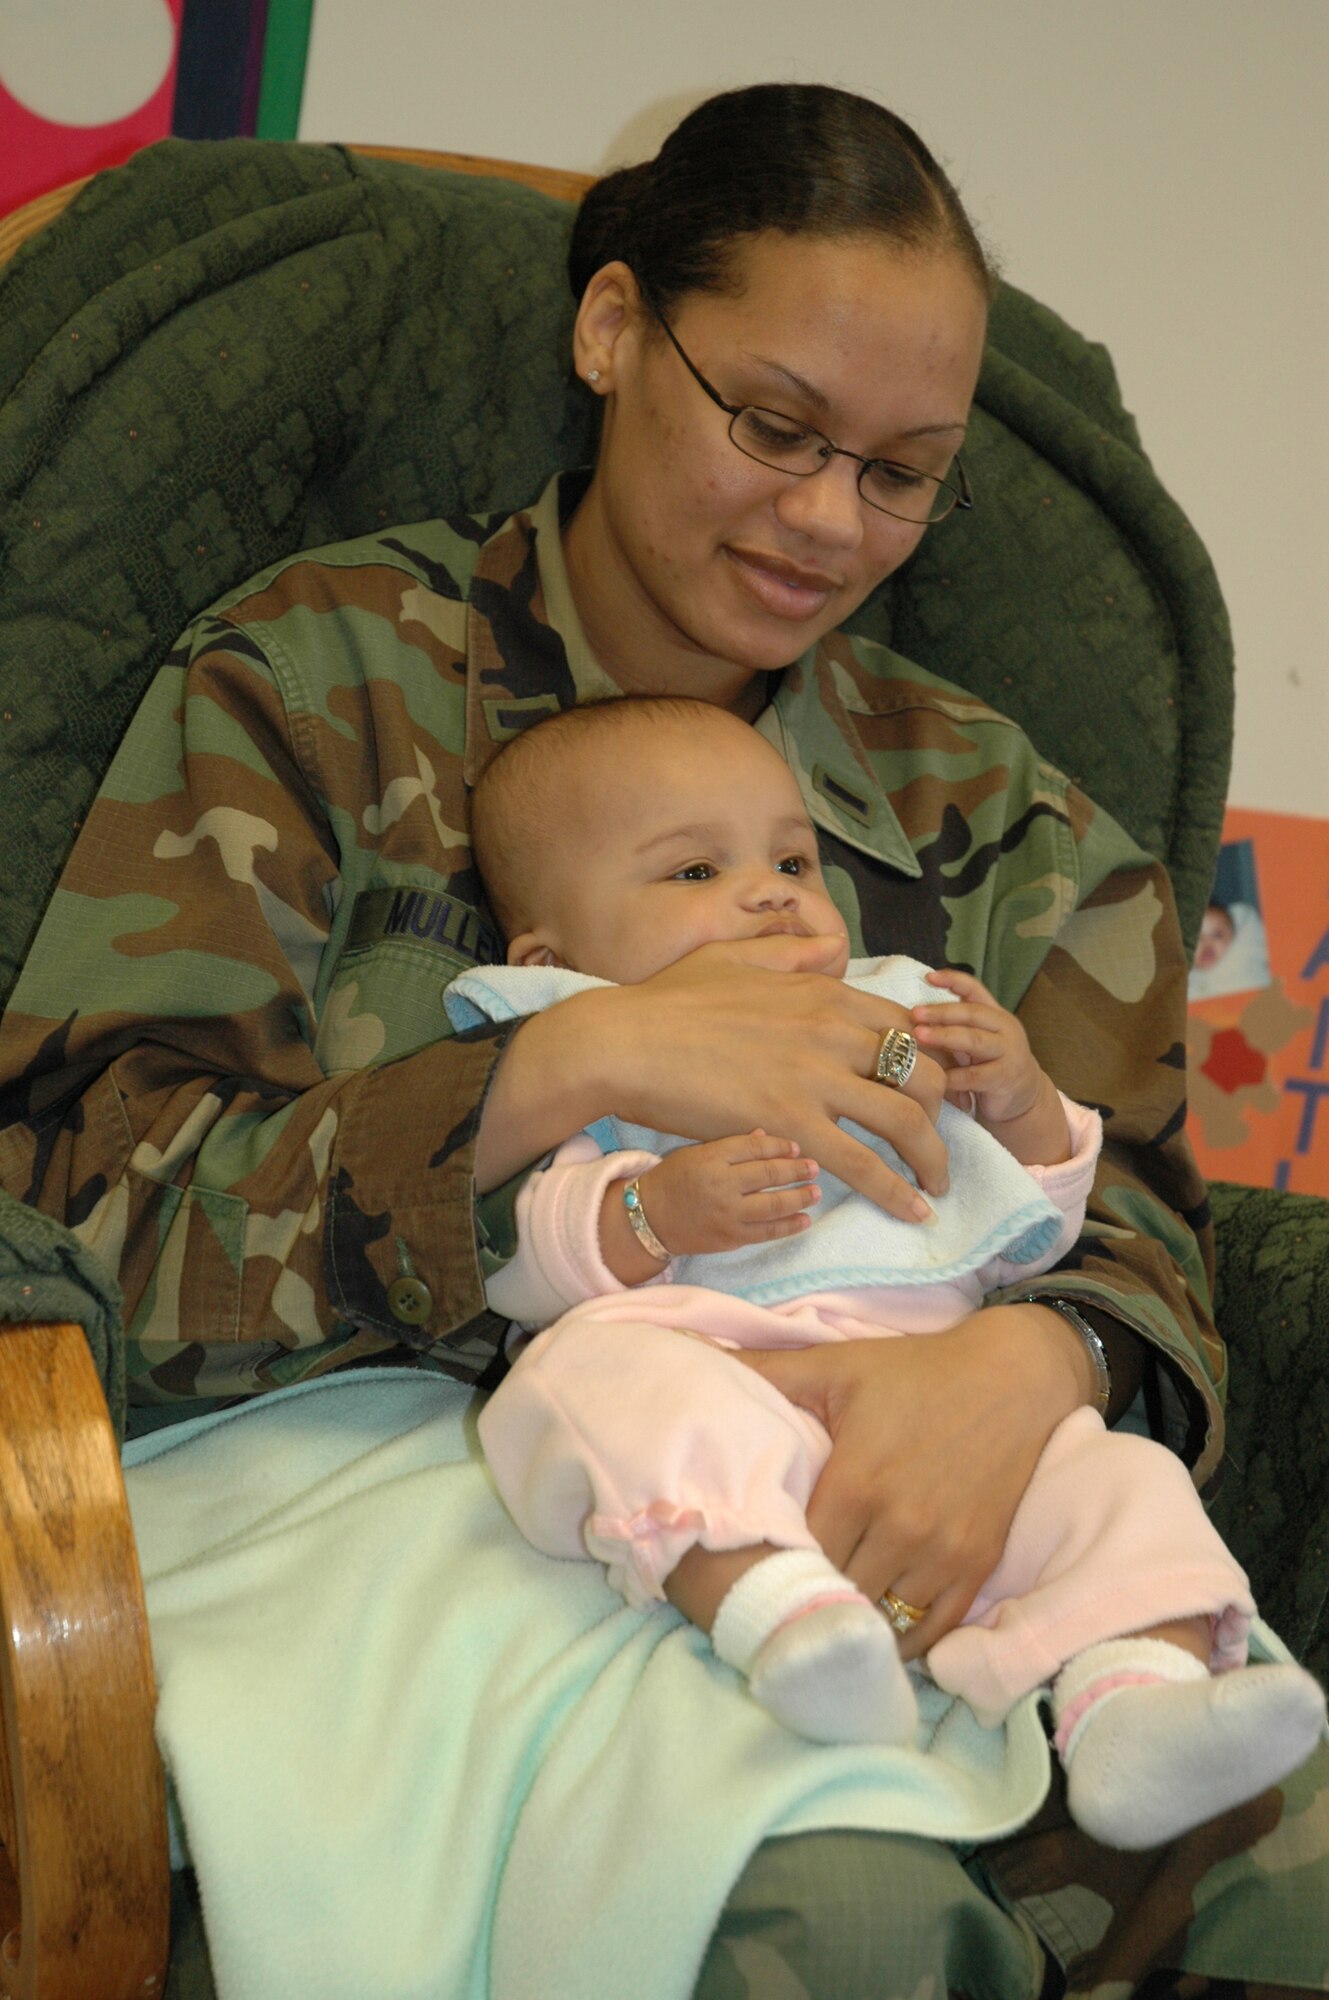 First Lieutenant Kristen Mullen, 22nd Mission Support Squadron, plays with her daughter, Kaitlynn, 6 months, at the Child Development Center April 11 during the Annual Month of the Military Child luncheon.  (Air Force photo by Tech. Sgt. Genevieve Morris 22nd ARW Public Affairs)